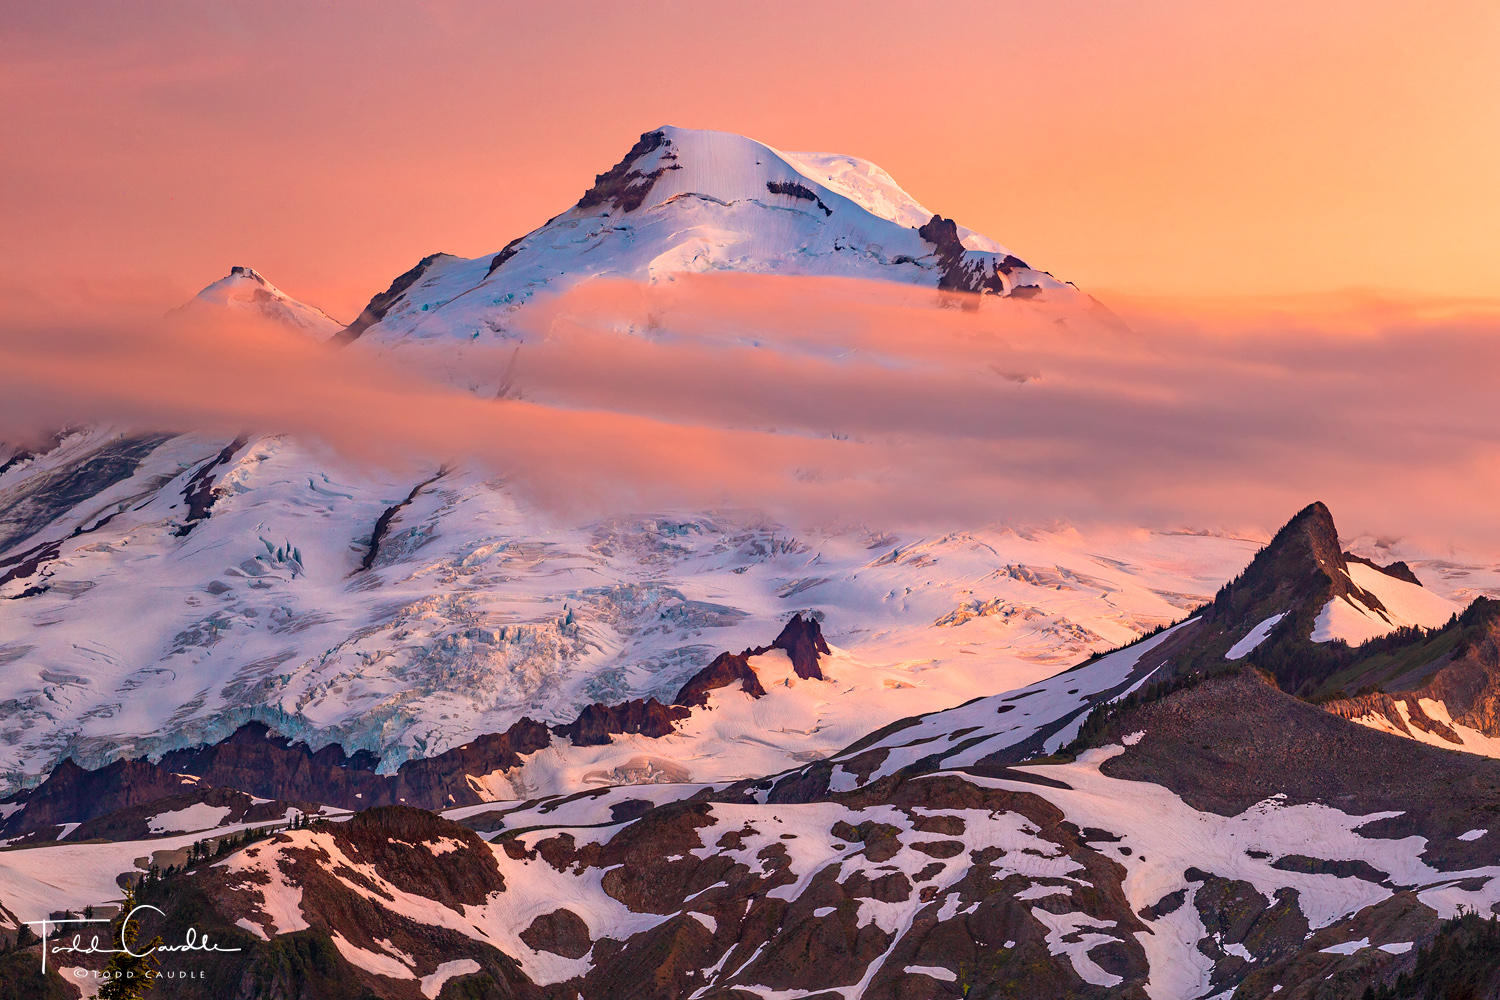 As the sun dips below the horizon, the sky glows with its warm hues over Mount Baker.